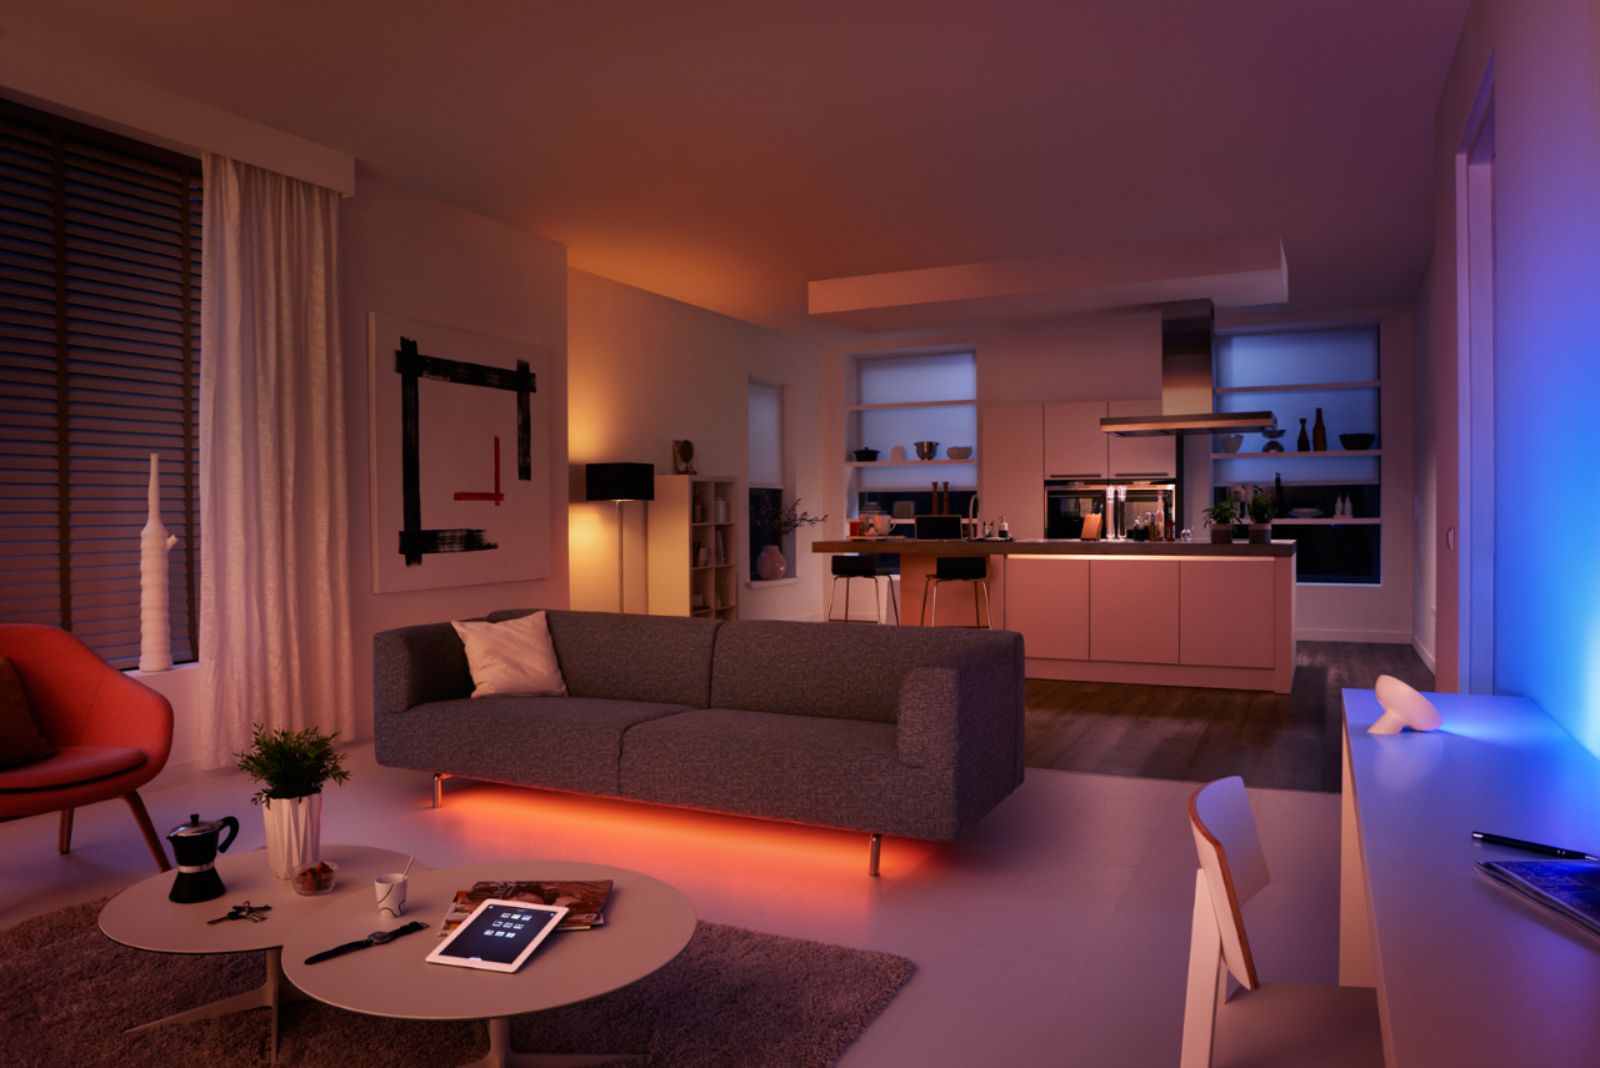 Old Philips Hue Lightstrips can finally be extended again 